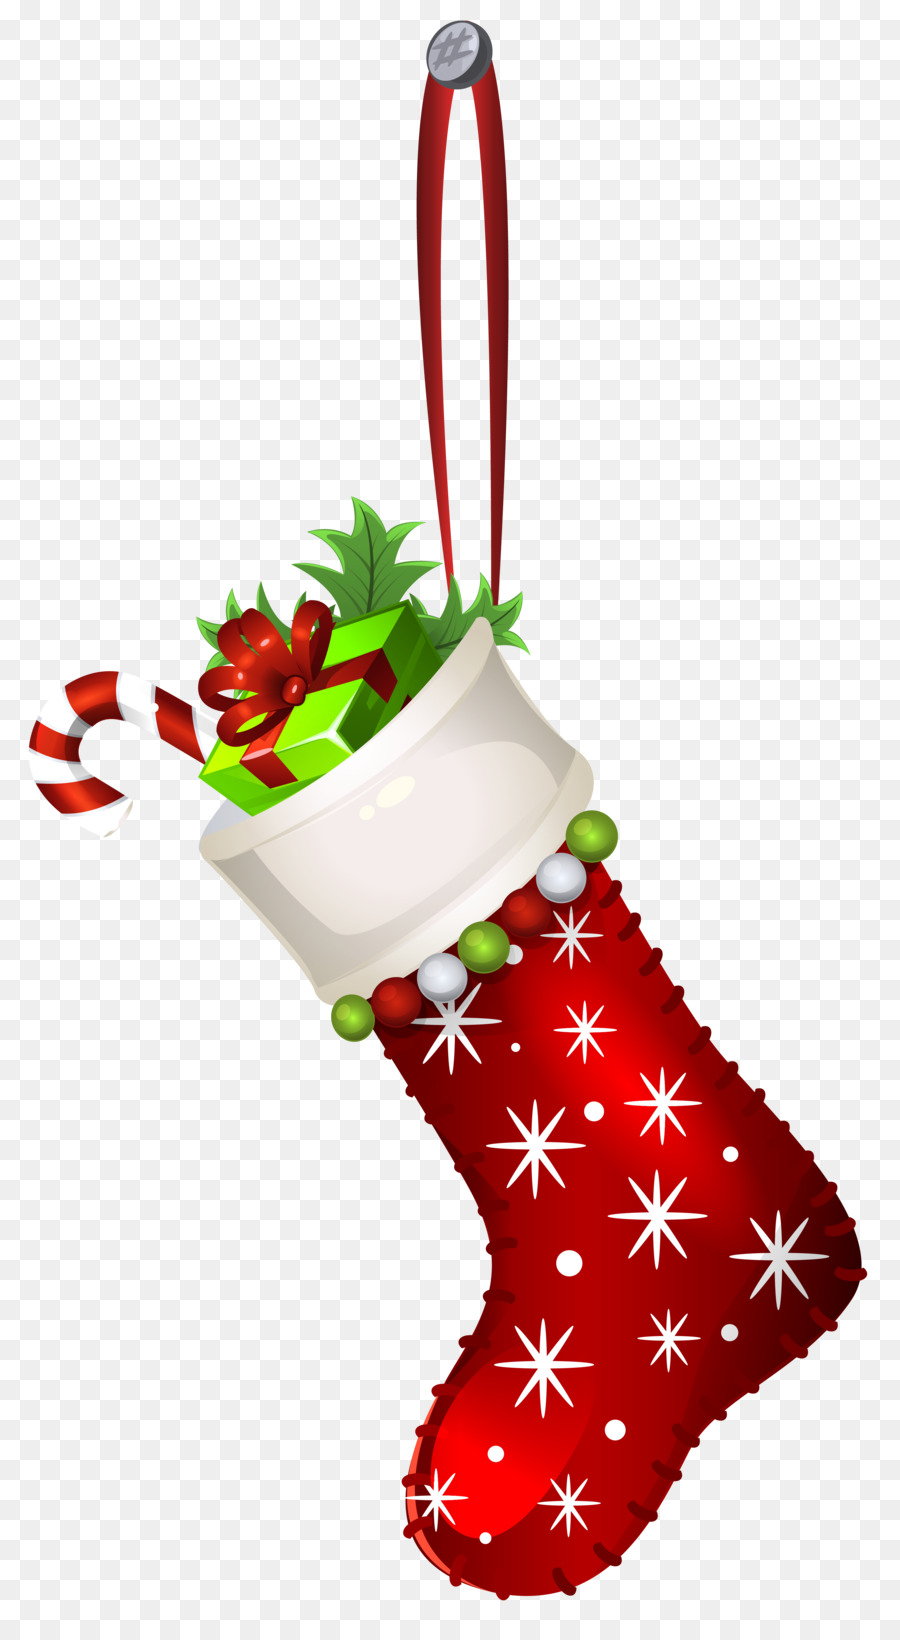 Candy cane Christmas decoration Christmas Stockings Clip art - socks png download - 3512*6356 - Free Transparent Candy Cane png Download.